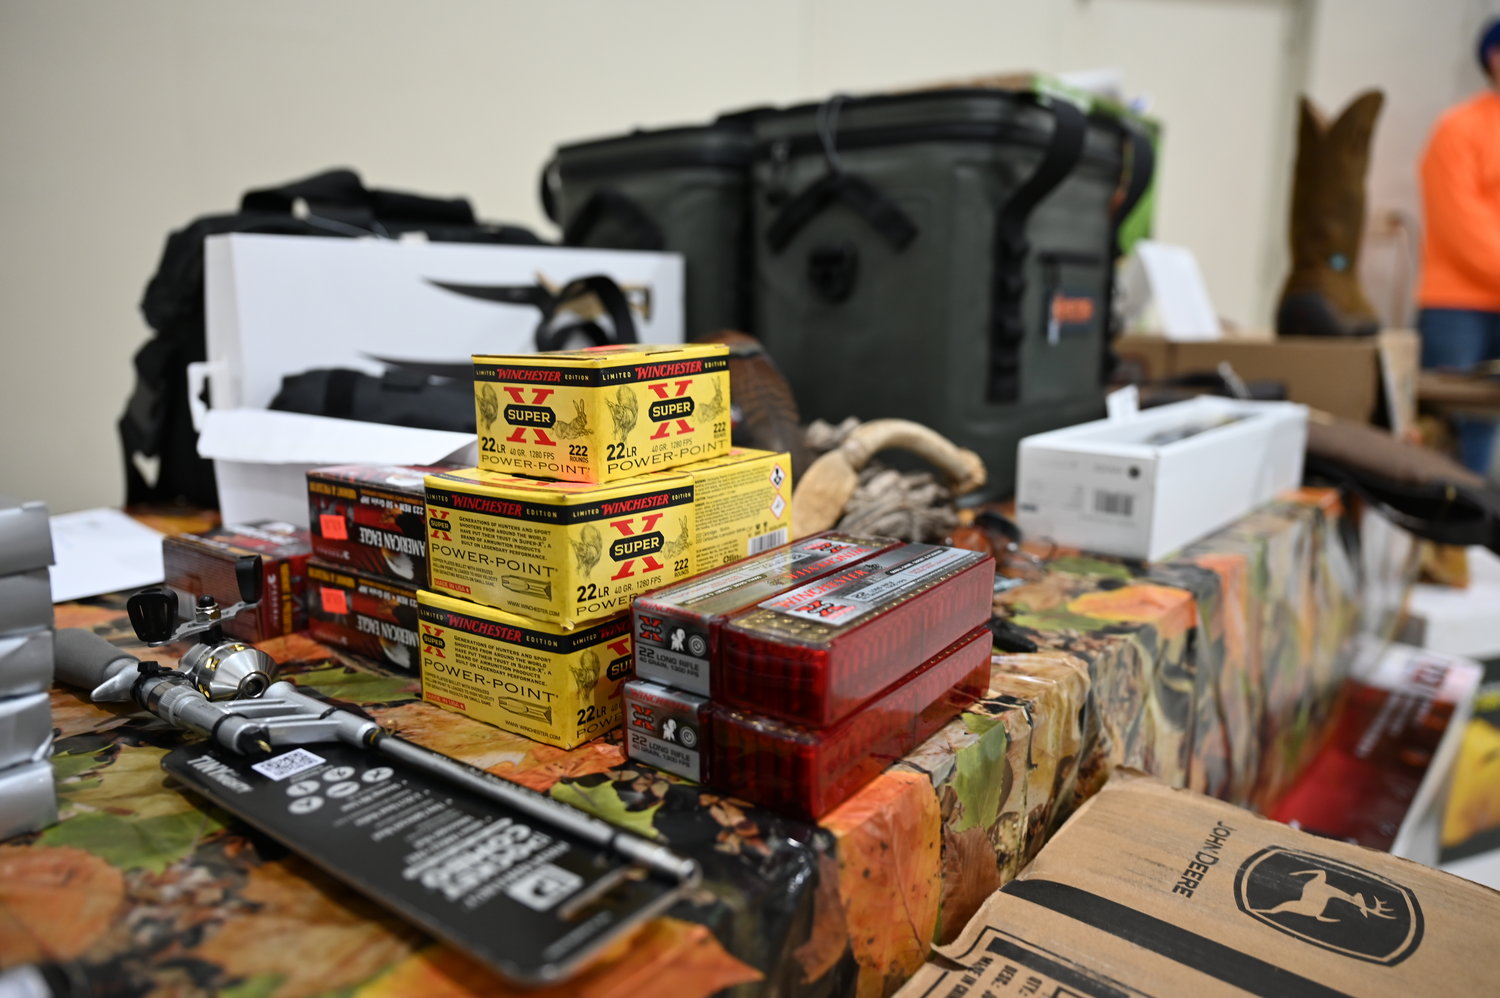 Boxes of ammo and other items were given as door prizes at a "Beast Feast" in Omega, Ga., on Friday, February 3, 2023. (Index/Roger Alford)